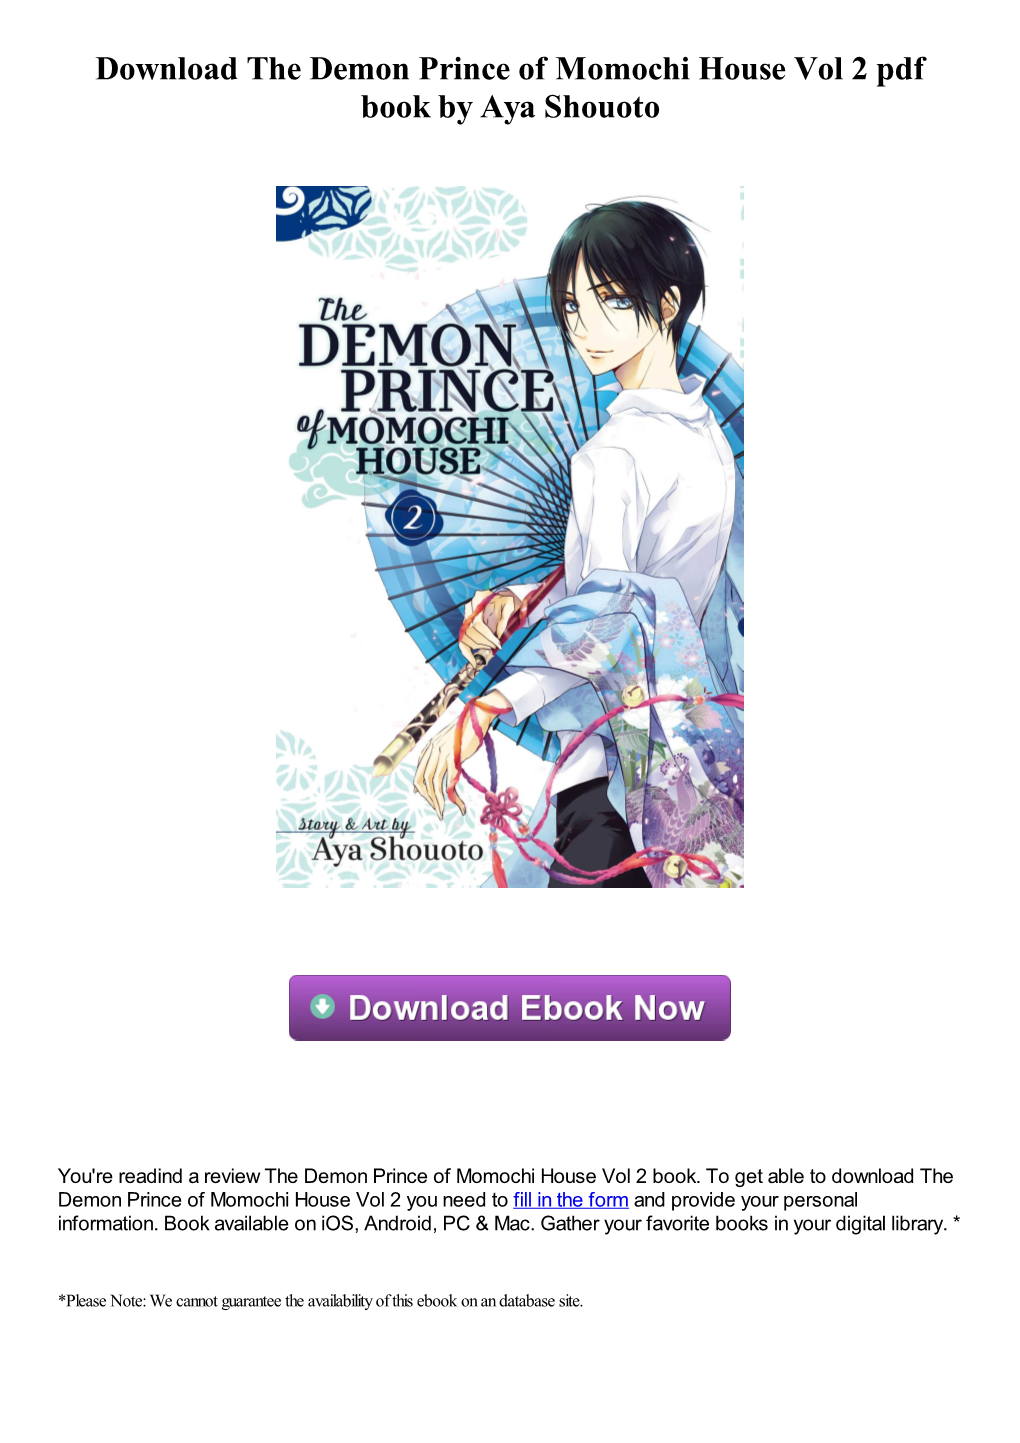 Download the Demon Prince of Momochi House Vol 2 Pdf Book by Aya Shouoto